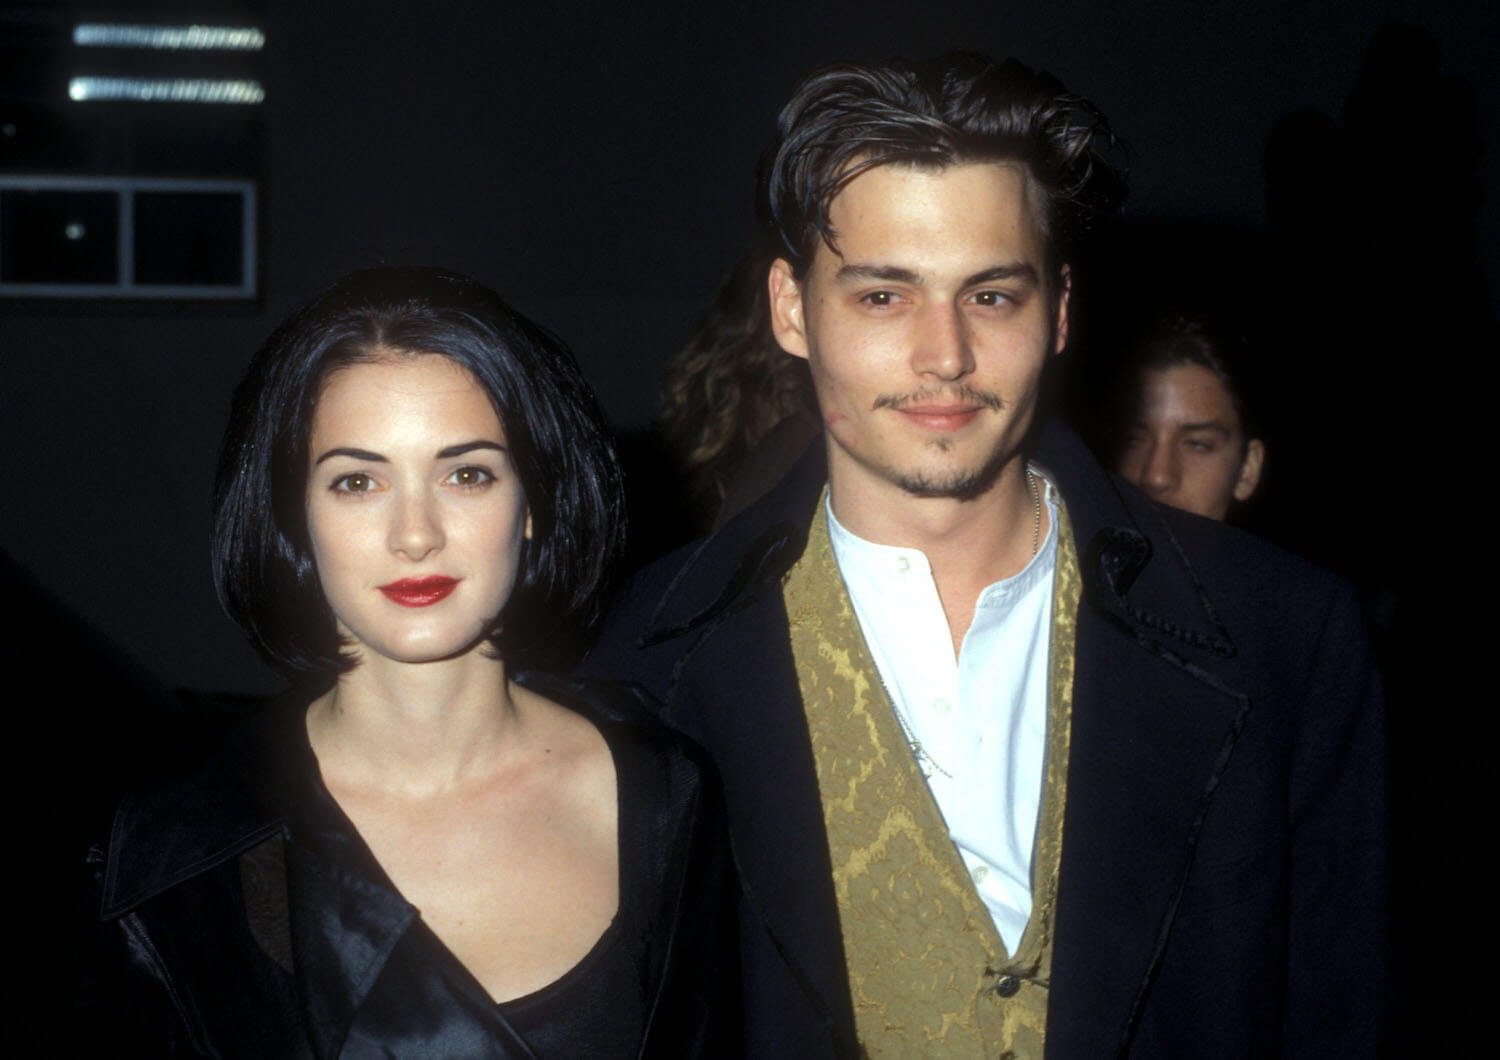 Winona Ryder and Johnny Depp at the 'Edward Scissorhands' premiere